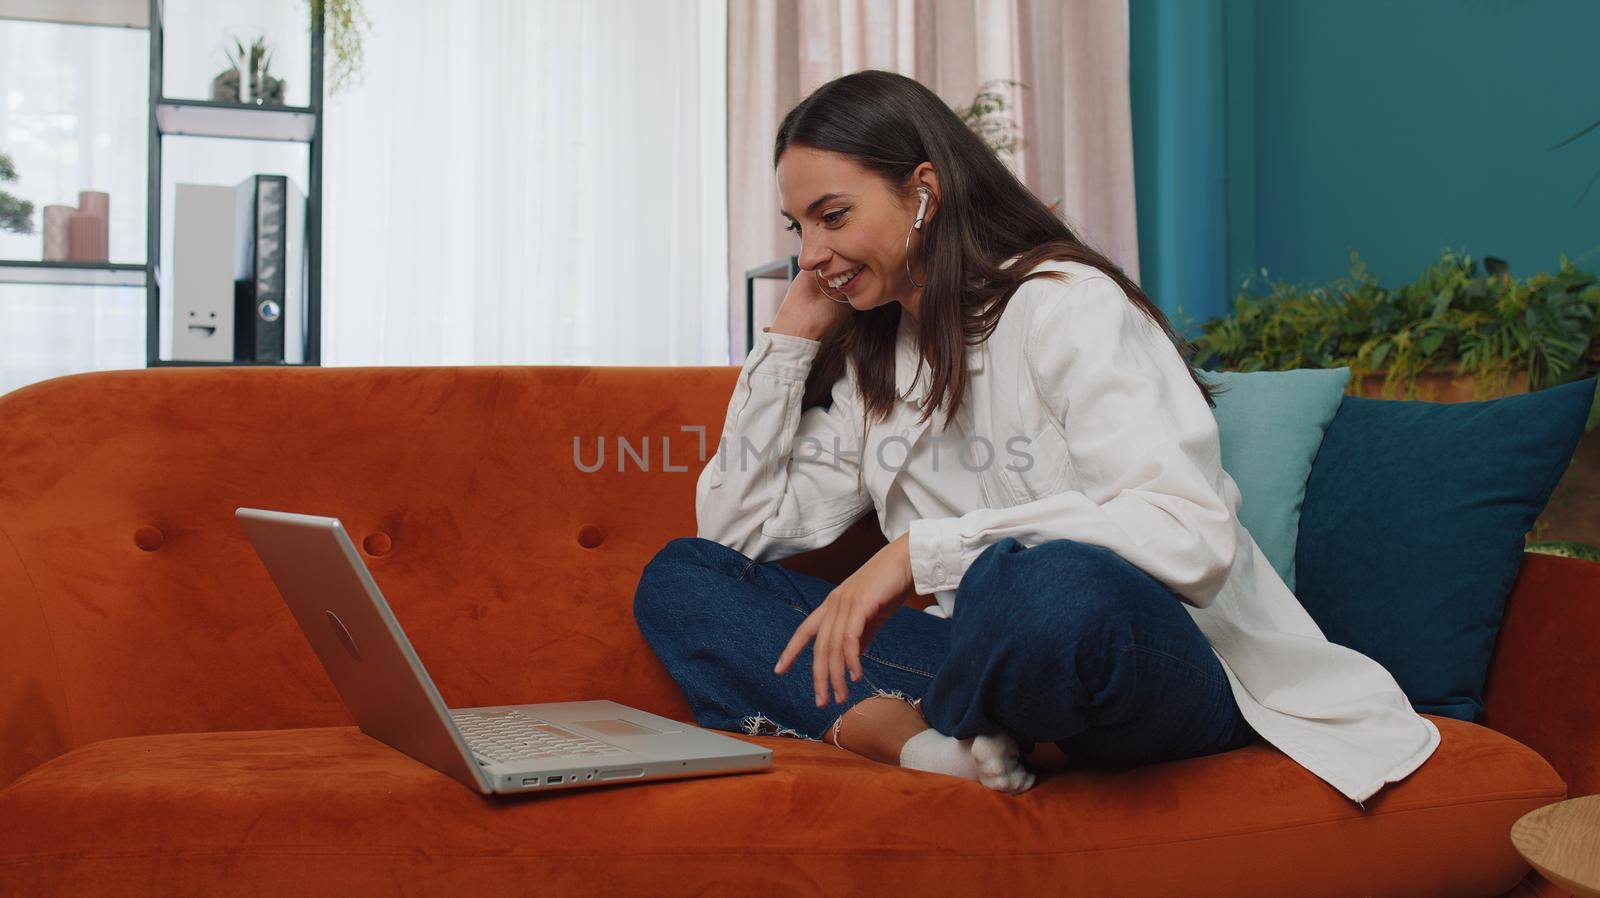 Portrait of caucasian girl sitting on couch, looking at camera, making video webcam conference call with friends or family, enjoying pleasant conversation. Young woman laughing, waving hello at home